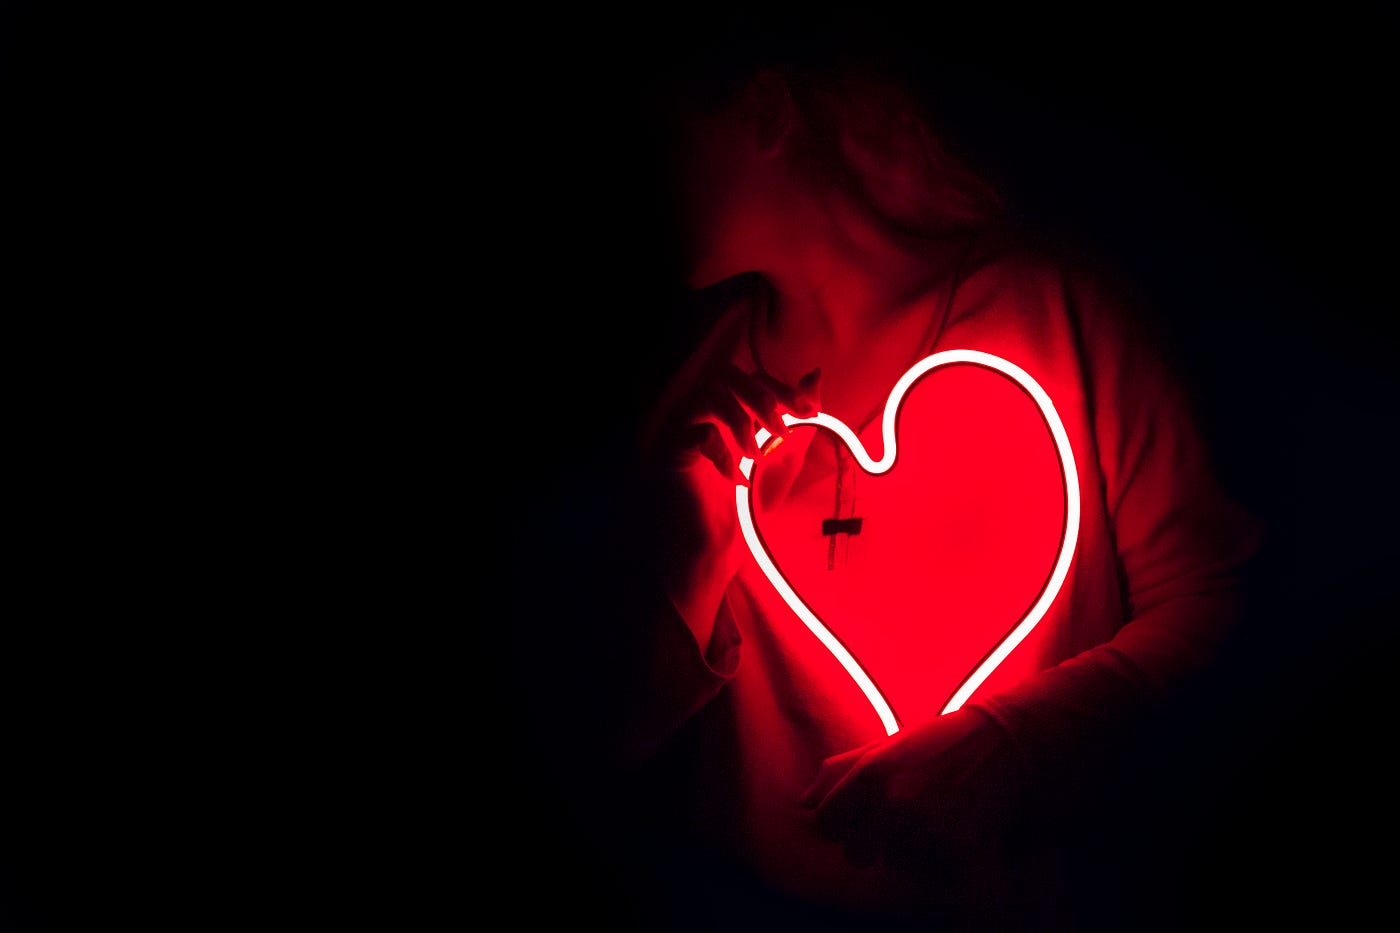 A woman holds a heart-shaped neon wire against her chest. Dark scene, with only light from the neon.